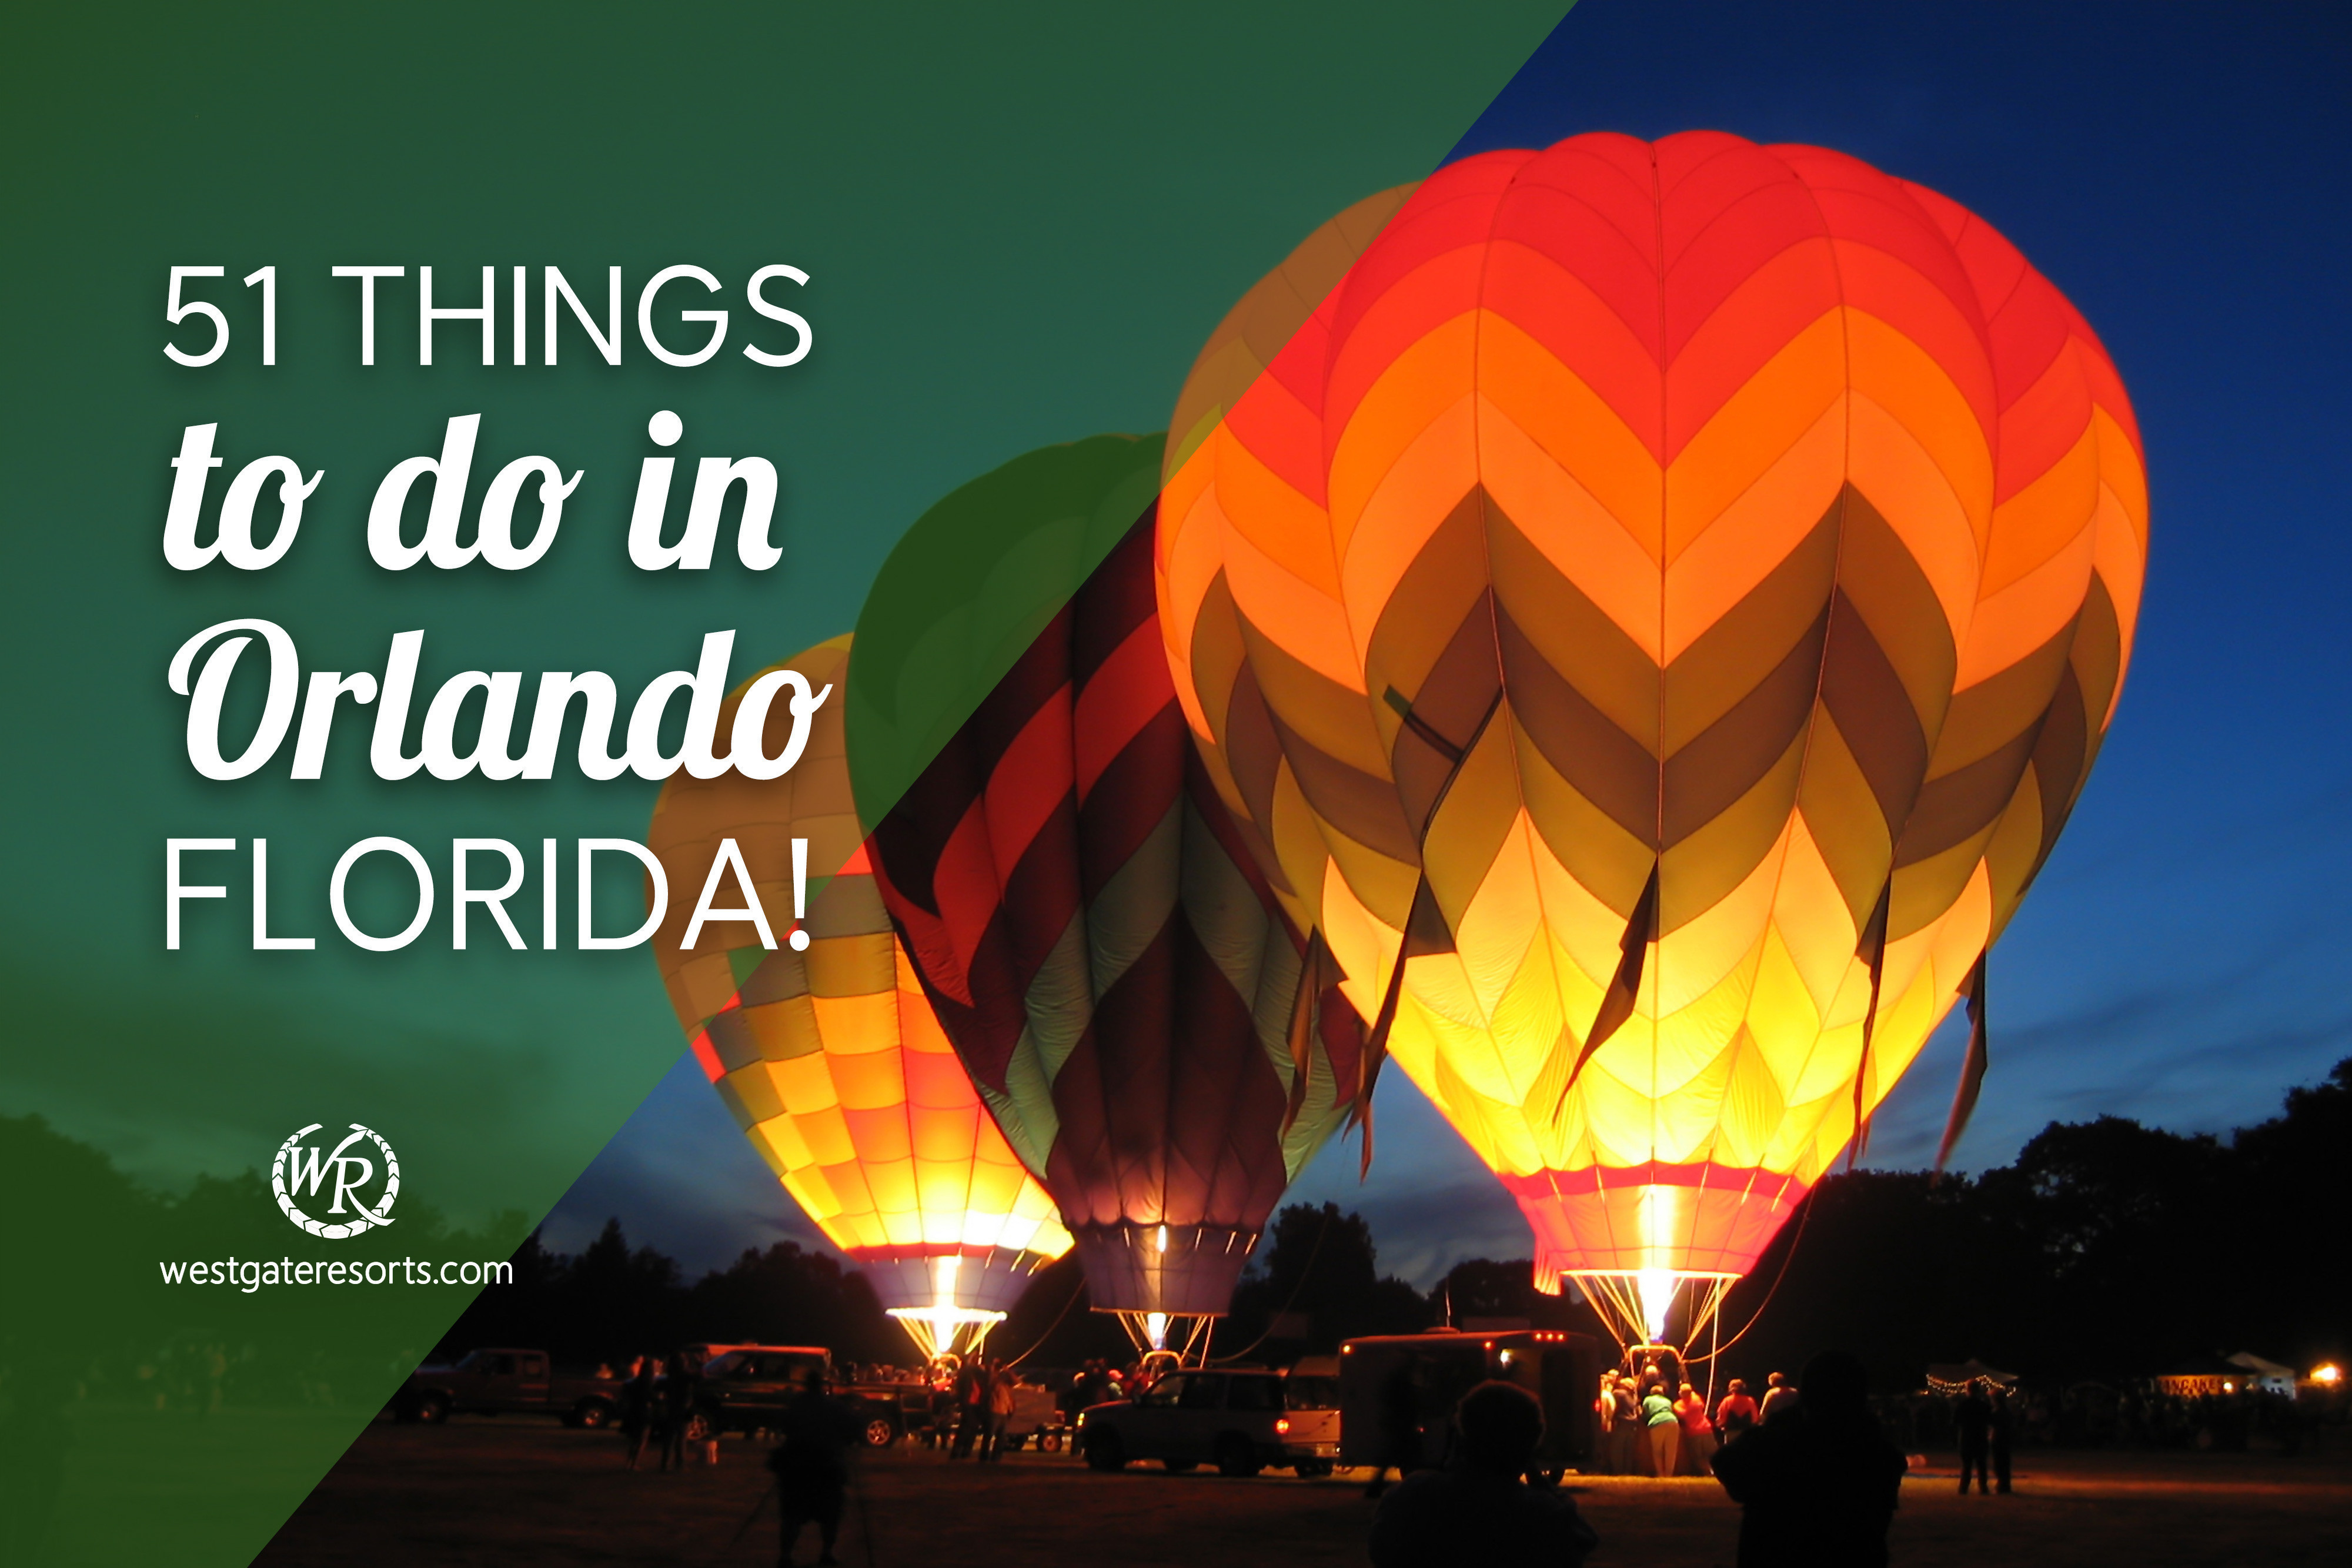 51 Things to do in Orlando Florida!